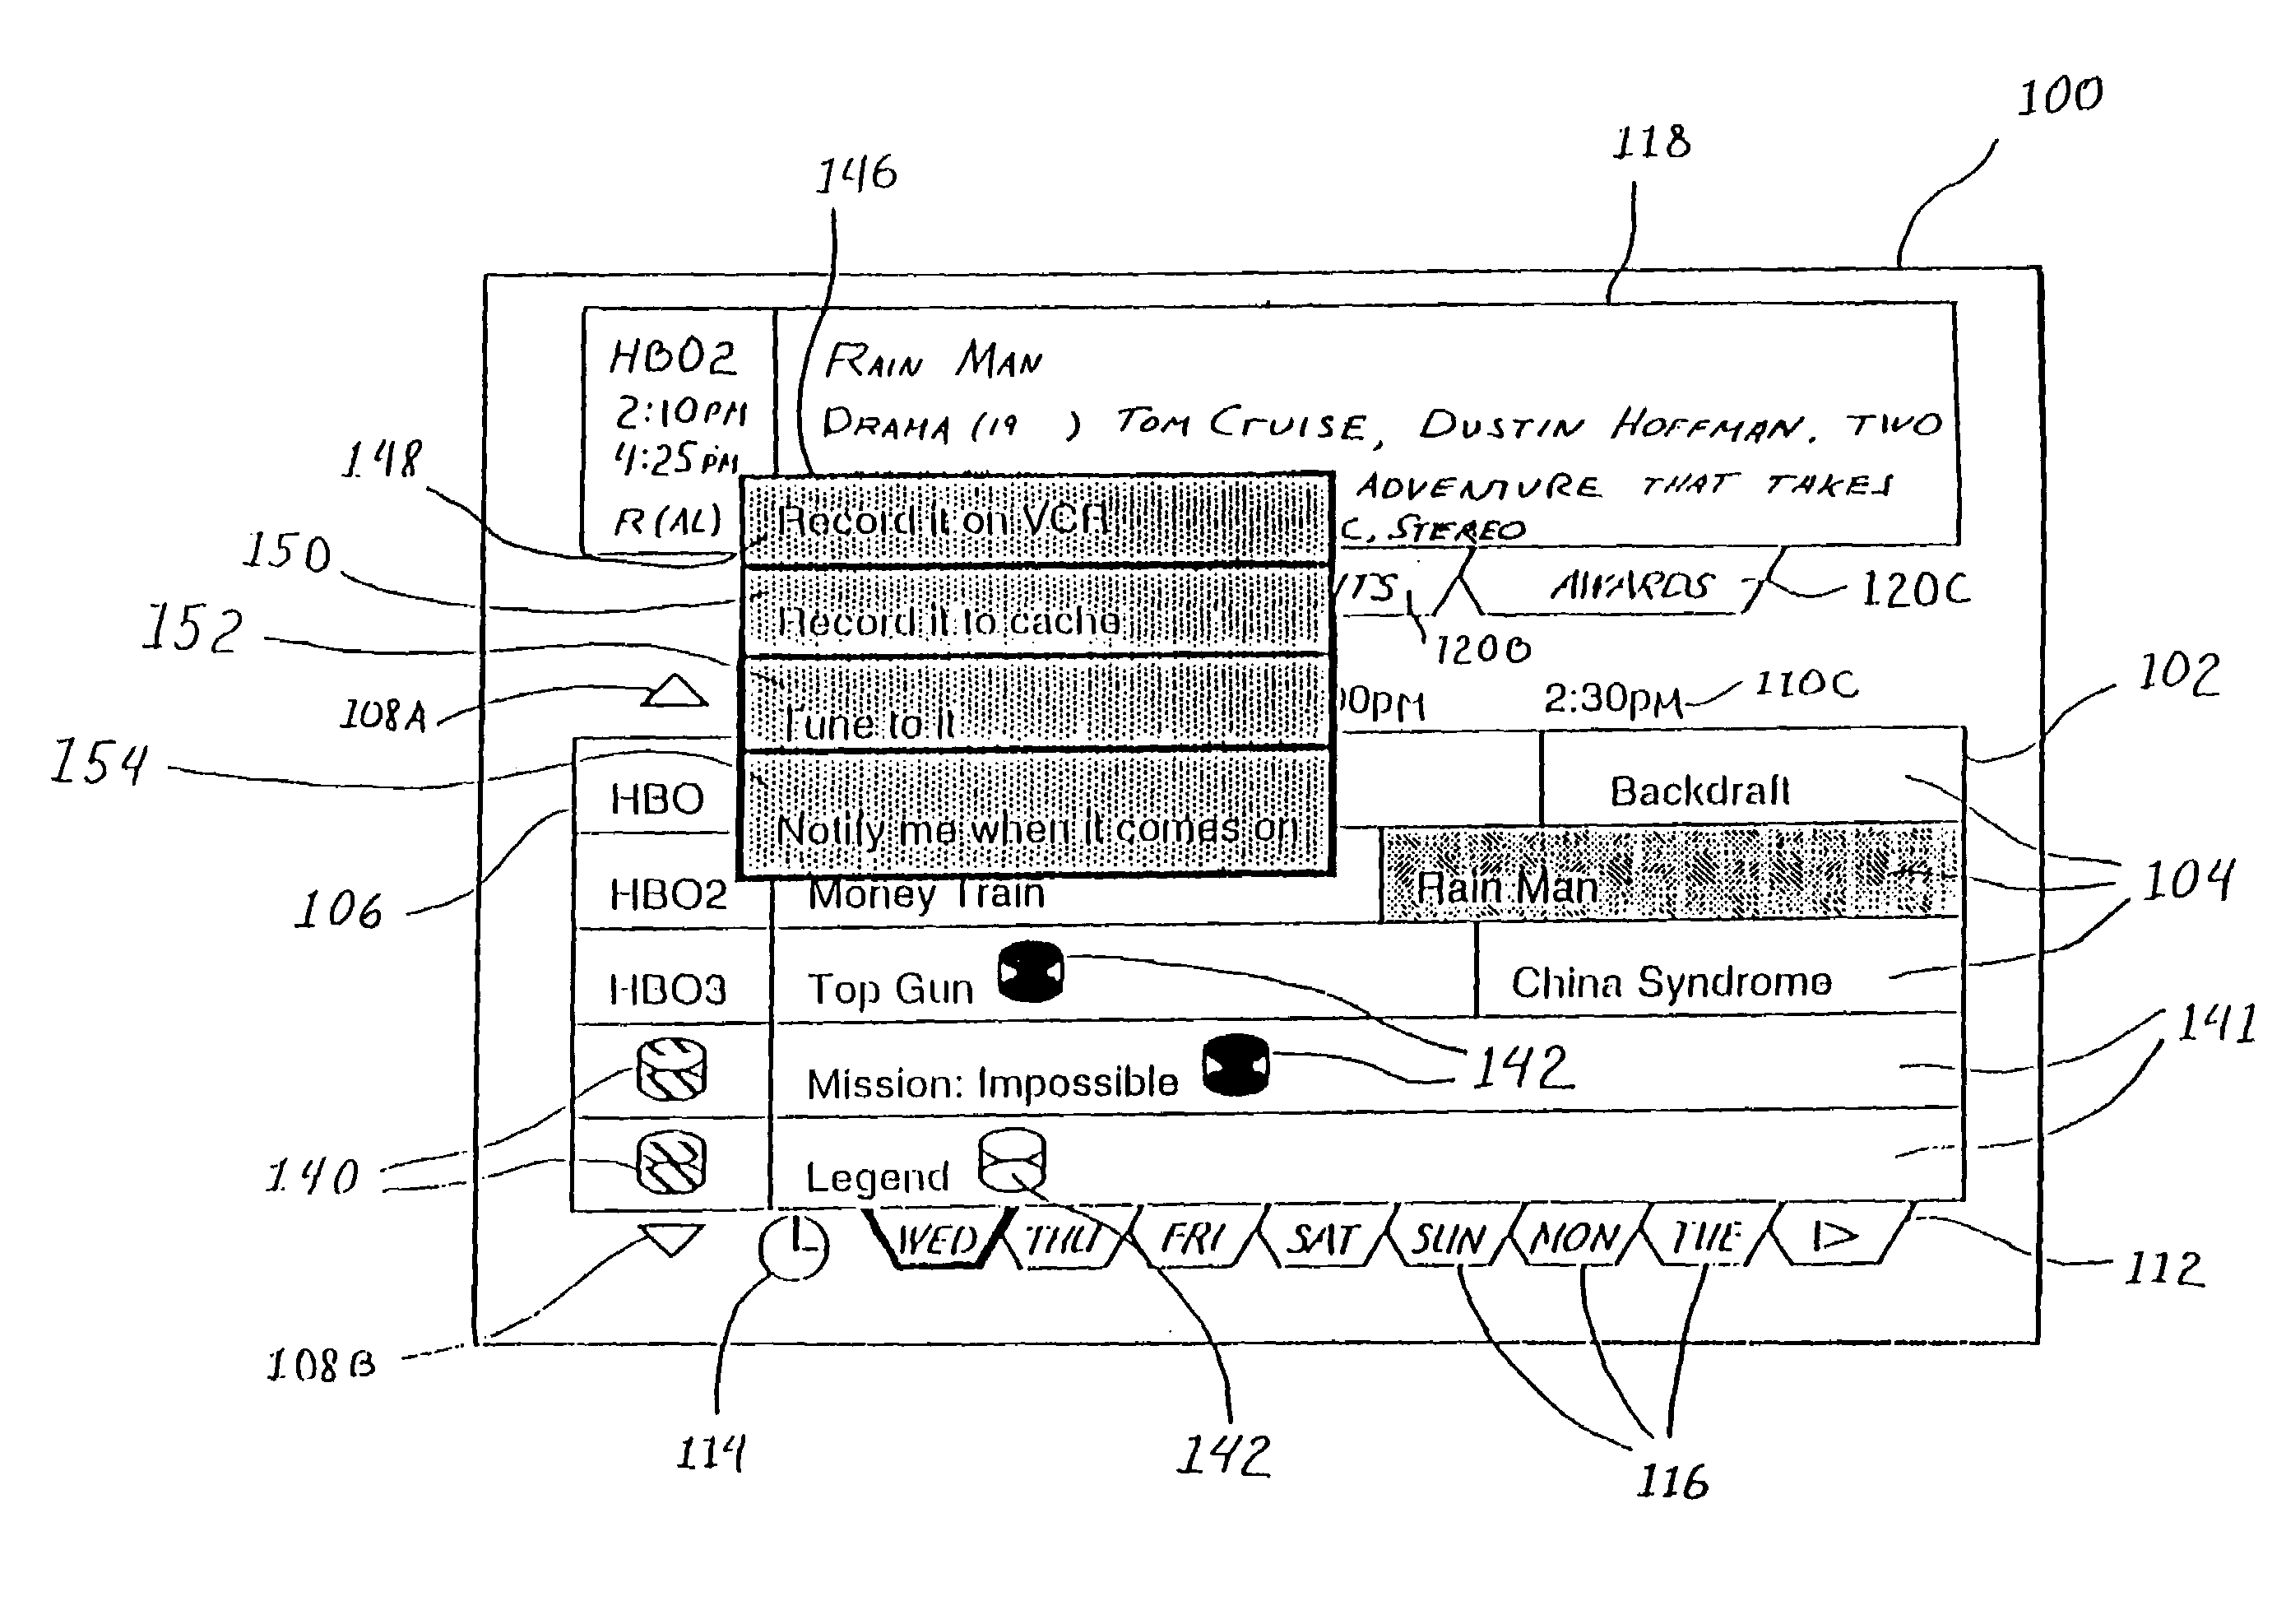 Method and apparatus for transmission, receipt, caching and display of one-way broadcast programming and data